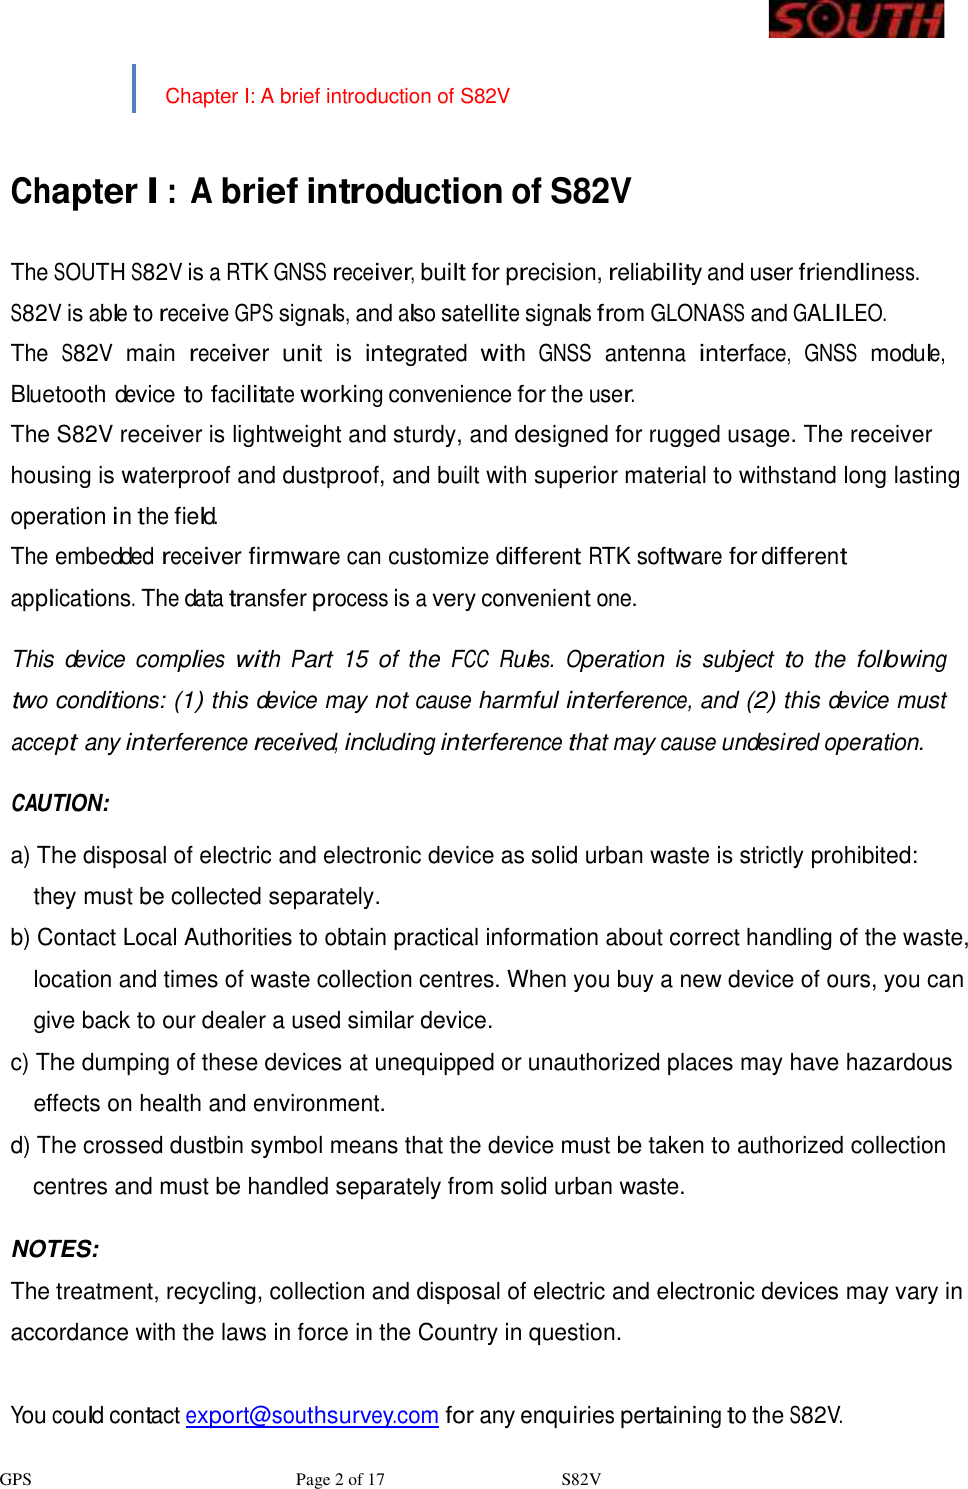 GPS                              Page 2 of 17                    S82V     Chapter I: A brief introduction of S82V     Chapter I : A brief introduction of S82V   The SOUTH S82V is a RTK GNSS receiver, built for precision, reliability and user friendliness. S82V is able to receive GPS signals, and also satellite signals from GLONASS and GALILEO. The S82V main receiver unit is integrated with GNSS antenna interface, GNSS module, Bluetooth device to facilitate working convenience for the user. The S82V receiver is lightweight and sturdy, and designed for rugged usage. The receiver housing is waterproof and dustproof, and built with superior material to withstand long lasting operation in the field. The embedded receiver firmware can customize different RTK software for different applications. The data transfer process is a very convenient one.  This device complies with Part 15 of the FCC Rules. Operation is subject to the following two conditions: (1) this device may not cause harmful interference, and (2) this device must accept any interference received, including interference that may cause undesired operation.  CAUTION:  a) The disposal of electric and electronic device as solid urban waste is strictly prohibited:  they must be collected separately. b) Contact Local Authorities to obtain practical information about correct handling of the waste,  location and times of waste collection centres. When you buy a new device of ours, you can  give back to our dealer a used similar device. c) The dumping of these devices at unequipped or unauthorized places may have hazardous  effects on health and environment. d) The crossed dustbin symbol means that the device must be taken to authorized collection  centres and must be handled separately from solid urban waste.  NOTES: The treatment, recycling, collection and disposal of electric and electronic devices may vary in accordance with the laws in force in the Country in question.  You could contact export@southsurvey.com for any enquiries pertaining to the S82V.  2 